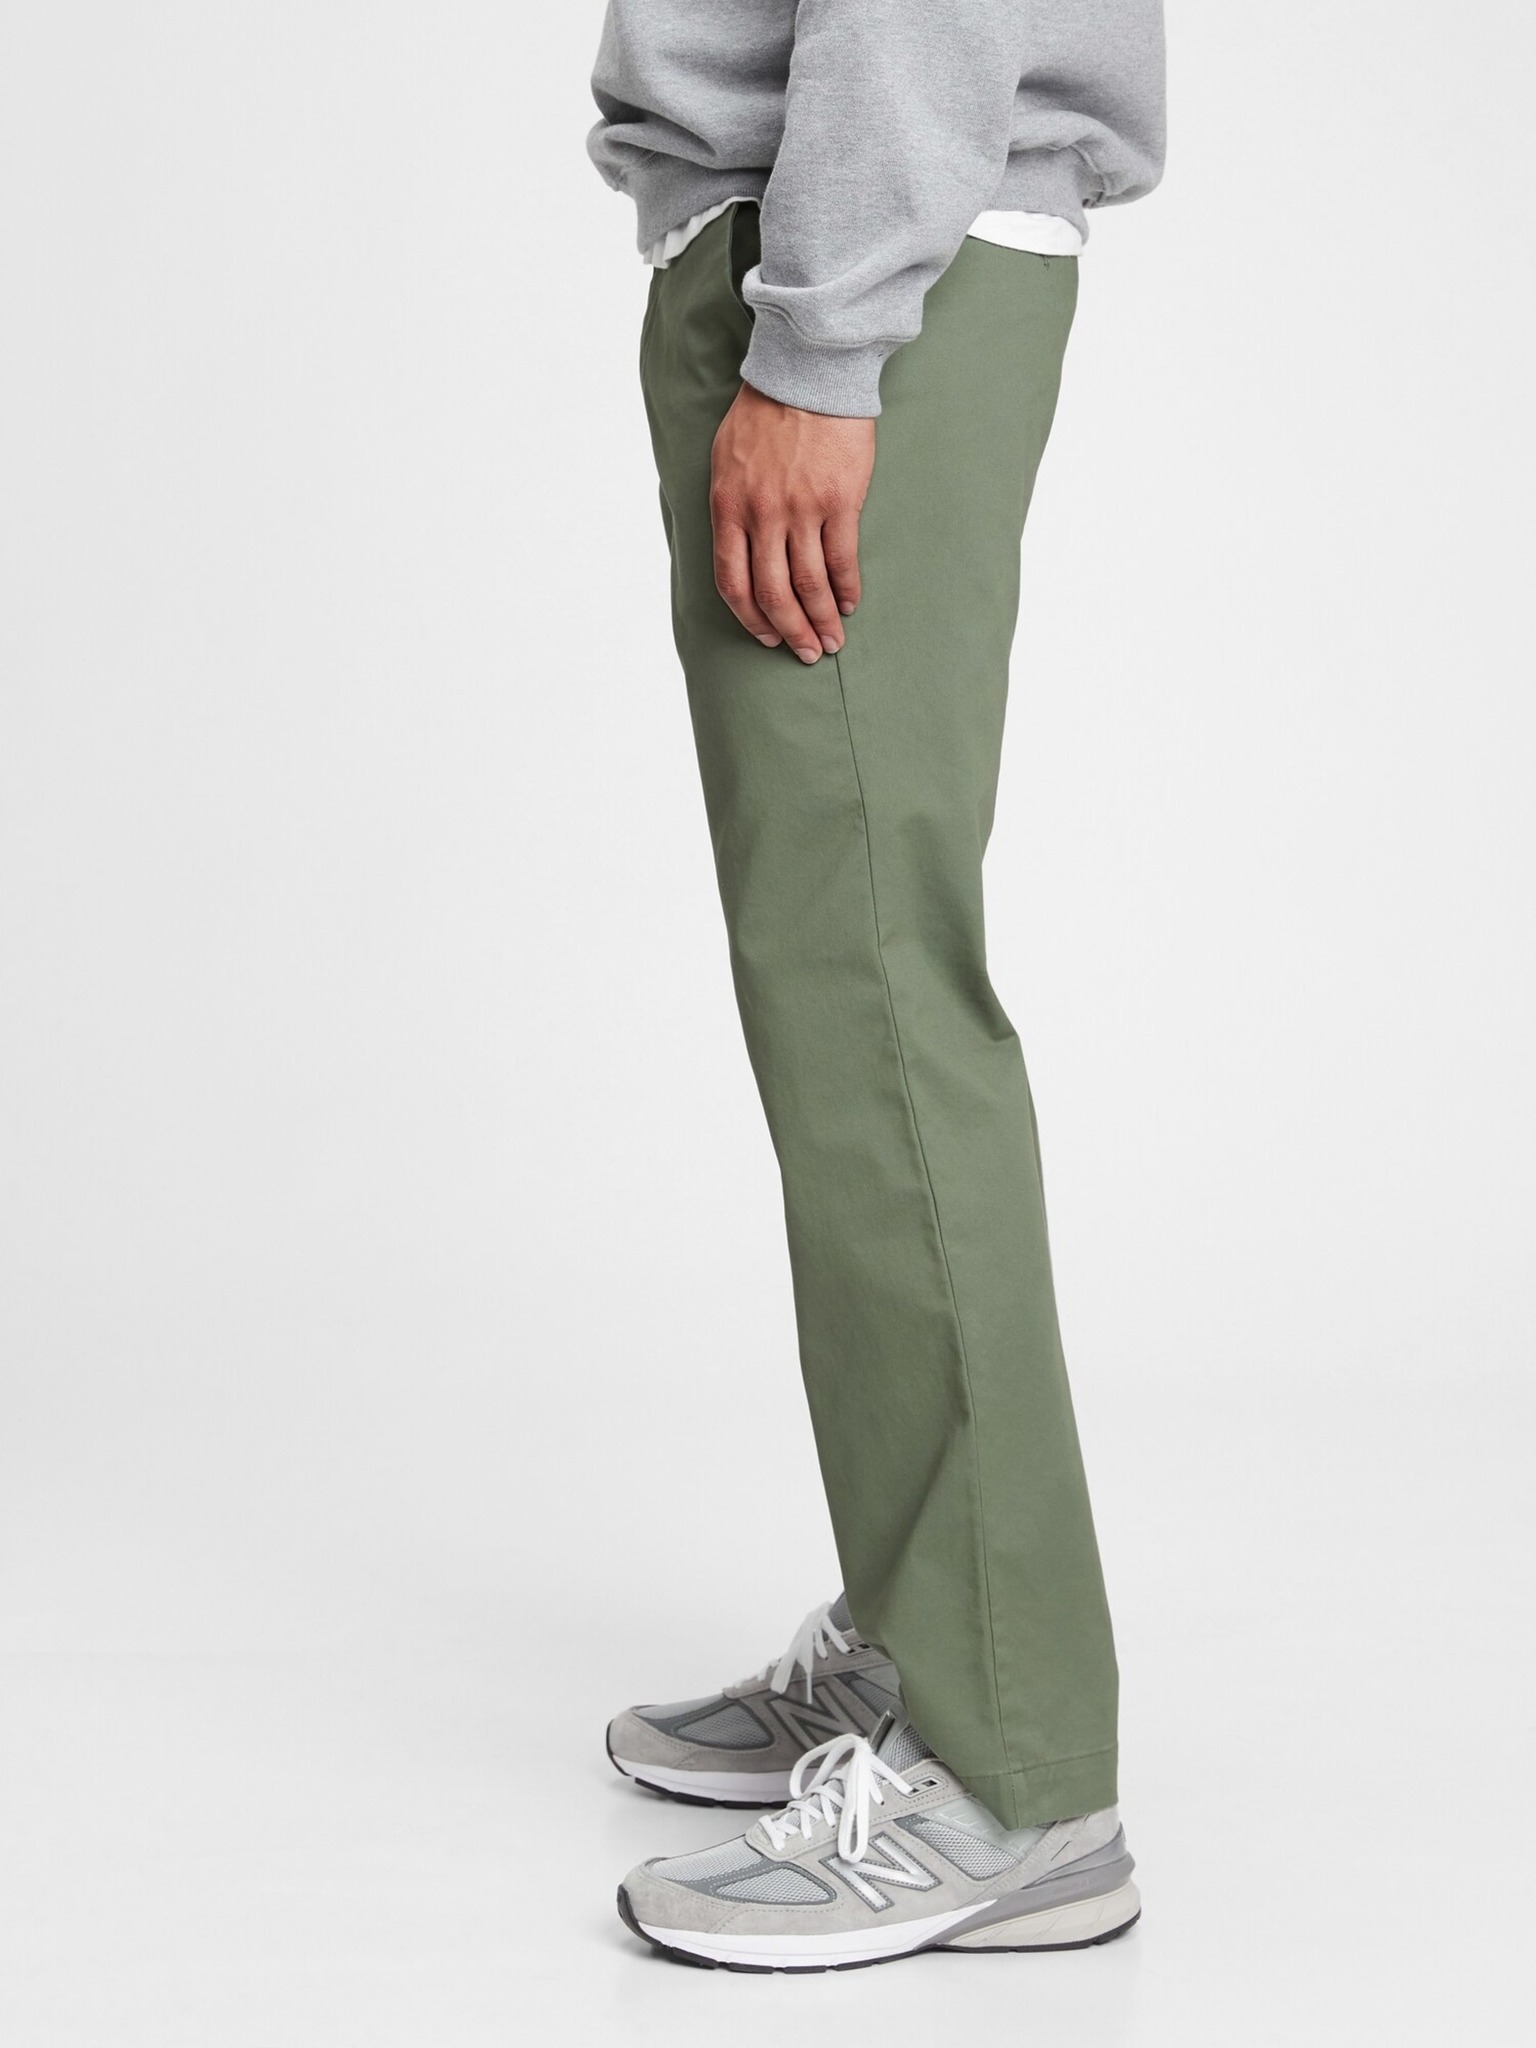 Buy Gap Easy Straight PullOn Trousers from the Gap online shop